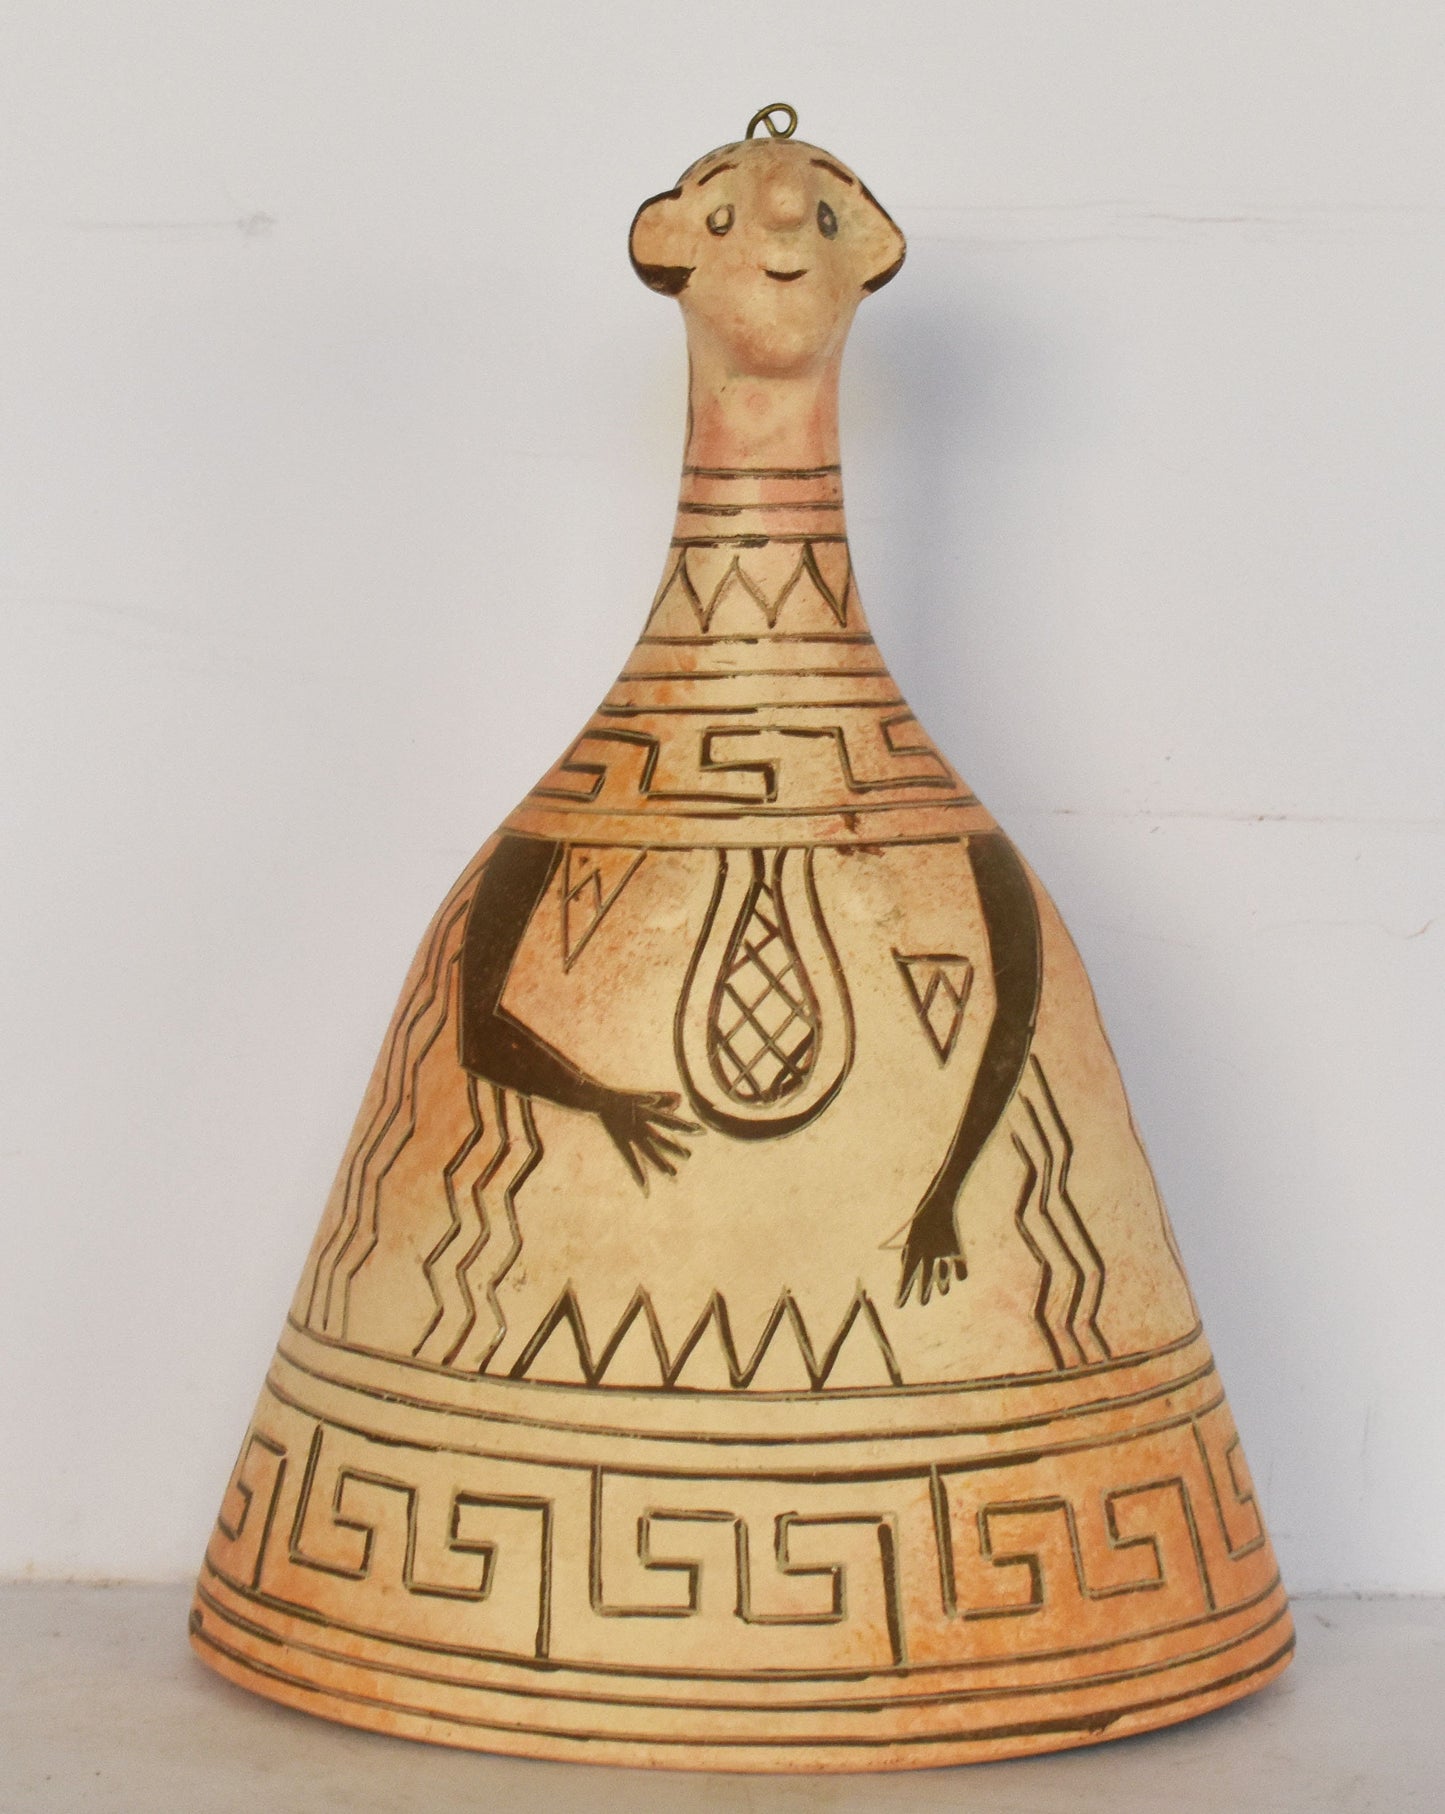 Bell-shaped Female Figurine - 600 BC - Boeotian - Archaeological Museum of Thiva - Reproduction - Ceramic Artifact